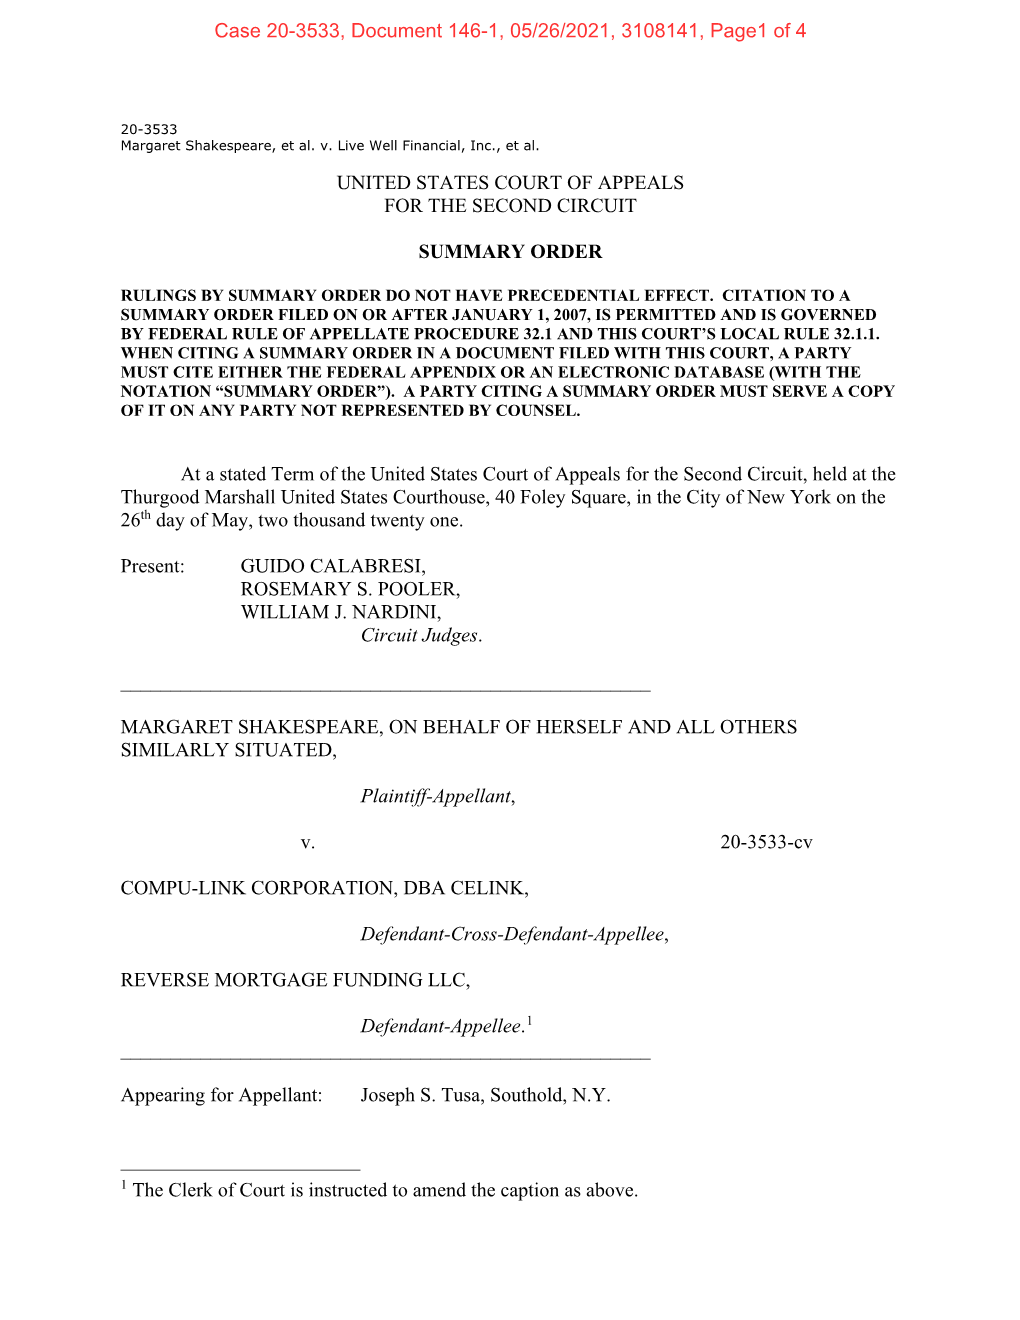 United States Court of Appeals for the Second Circuit Summary Order